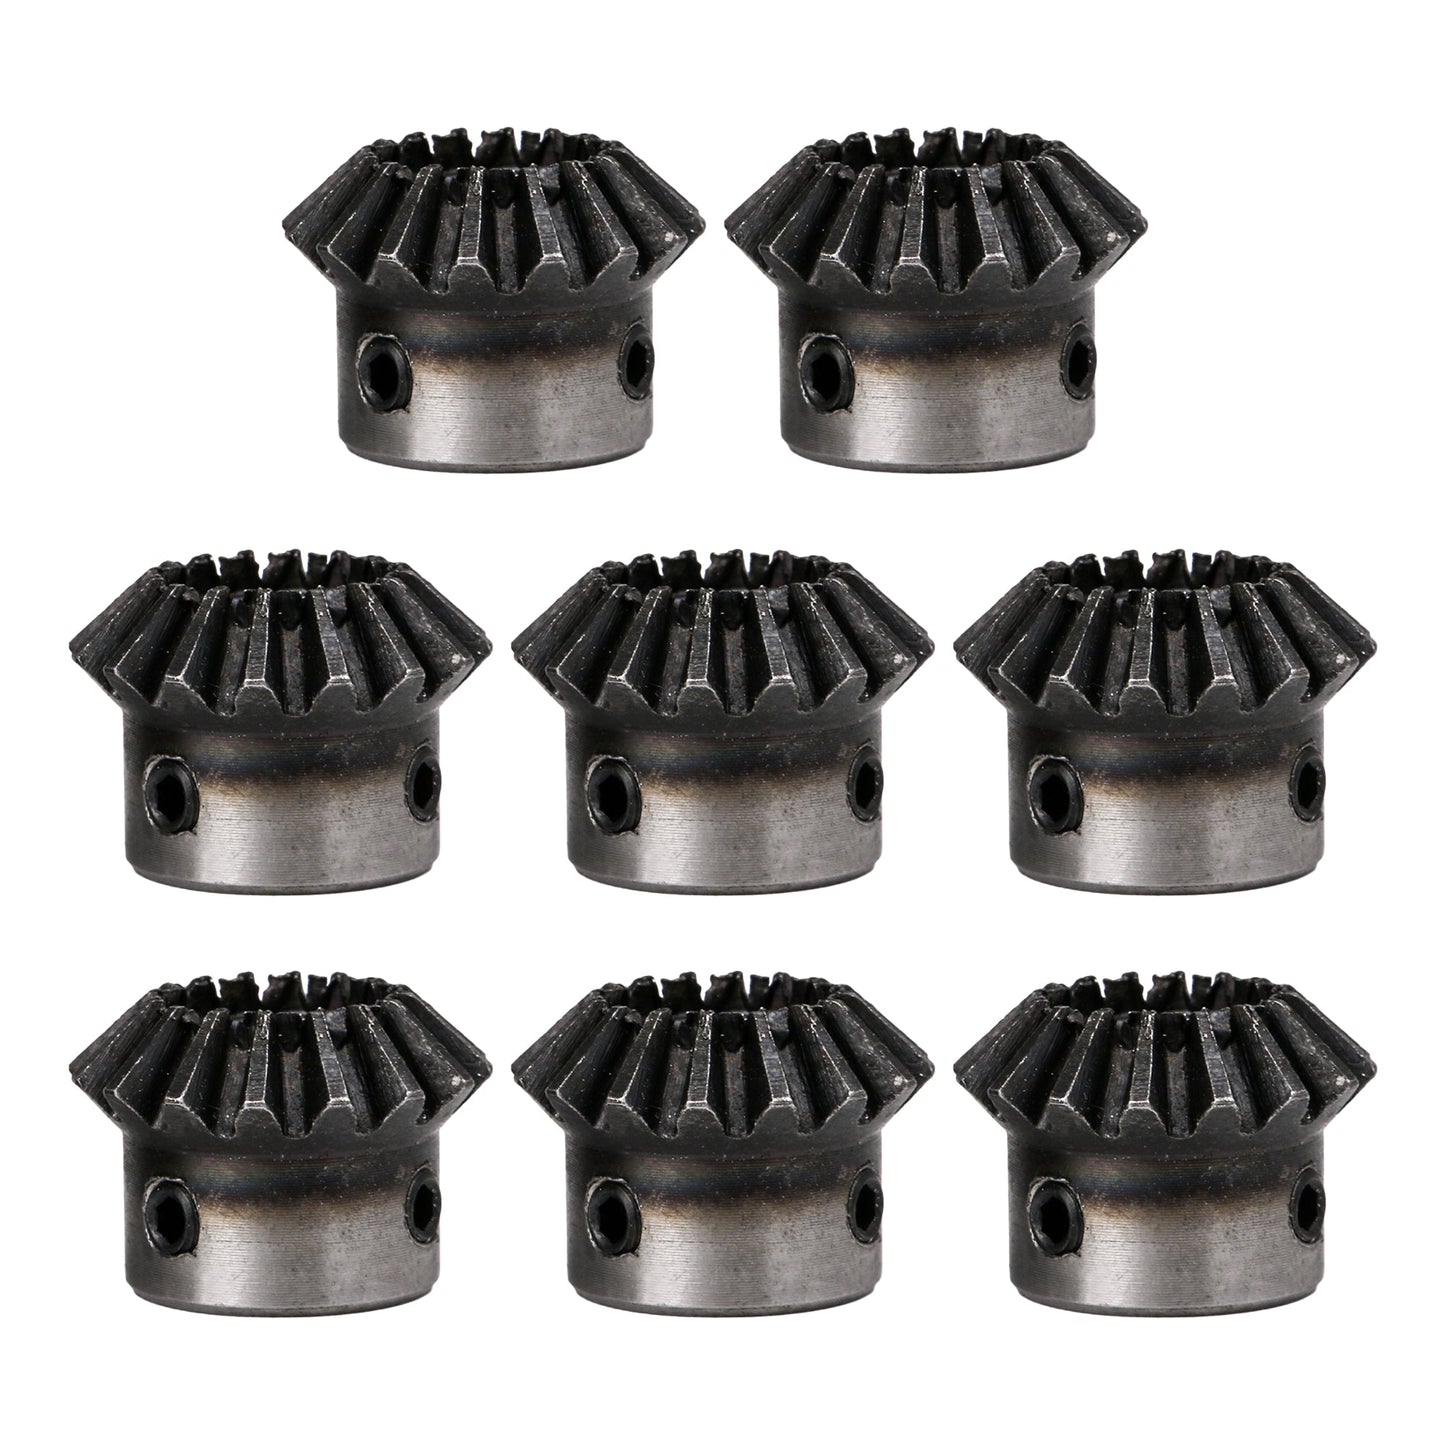 BQLZR Tapered Bevel Gear Wheel 1.5 Modulus 16T 0.47inch for DIY Motor Driving Pack of 8